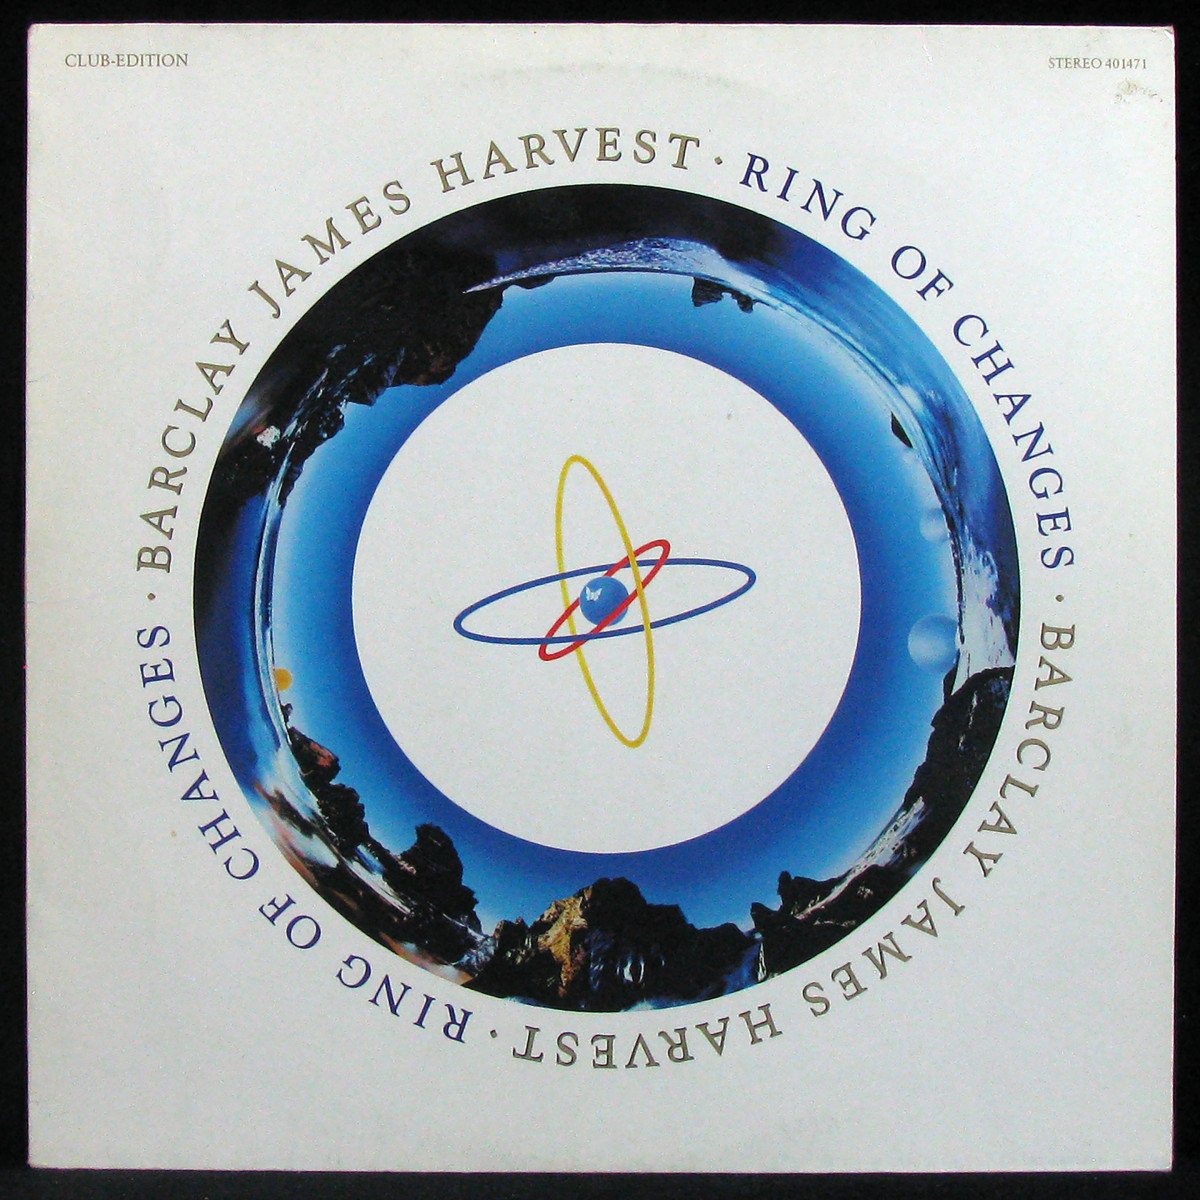 LP Barclay James Harvest — Ring Of Changes (club edition) фото